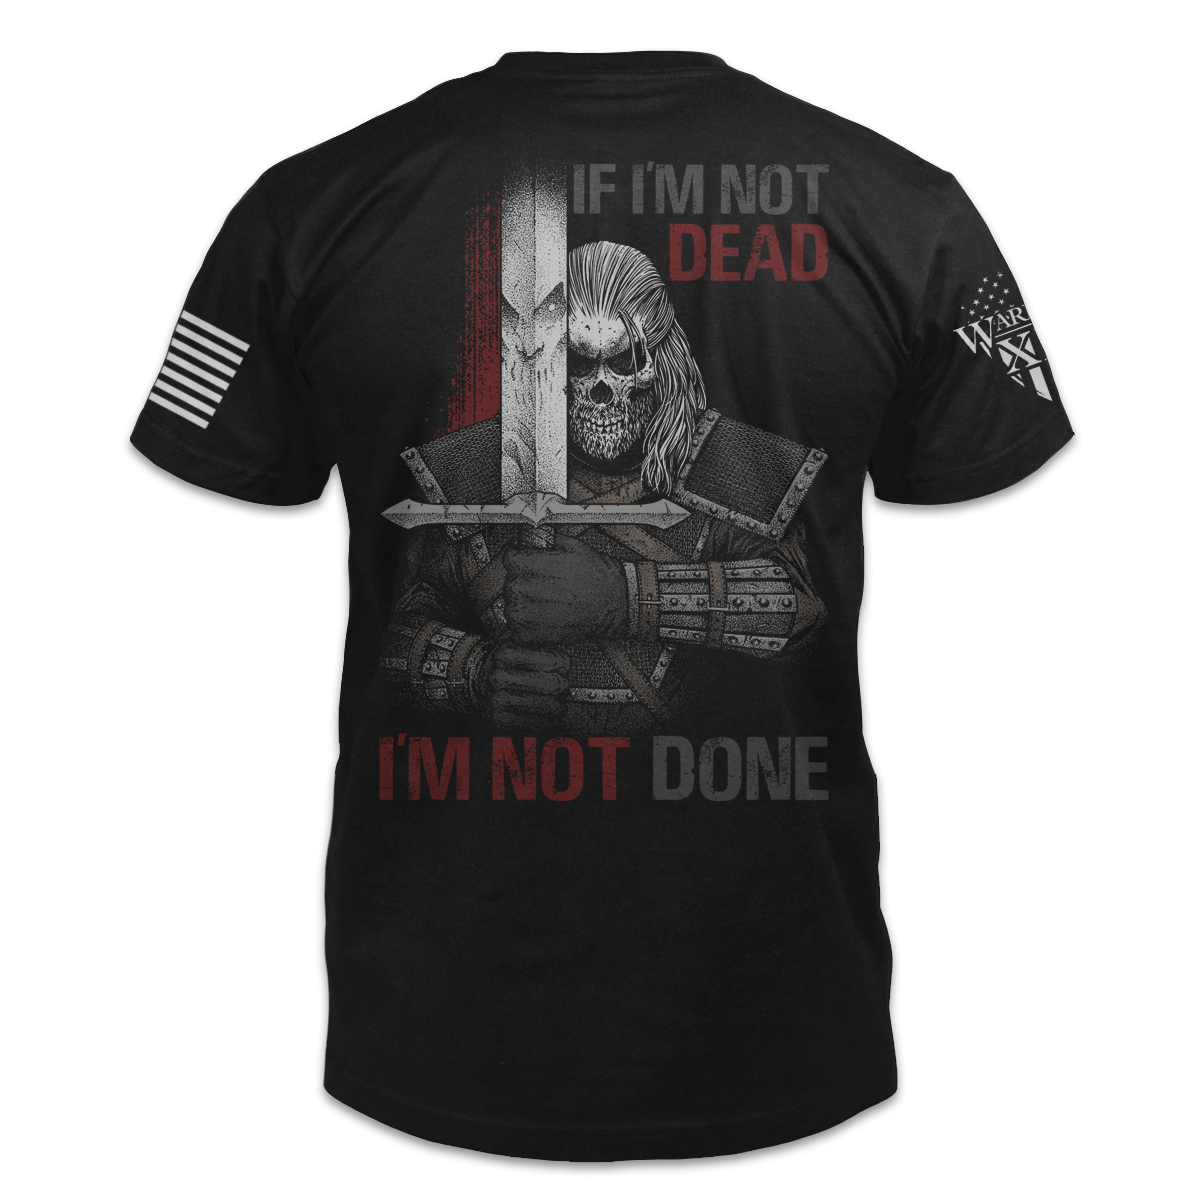 A black t-shirt with the words "If I'm not dead, I'm not done" with a warrior holding a sword printed on the back of the  shirt.